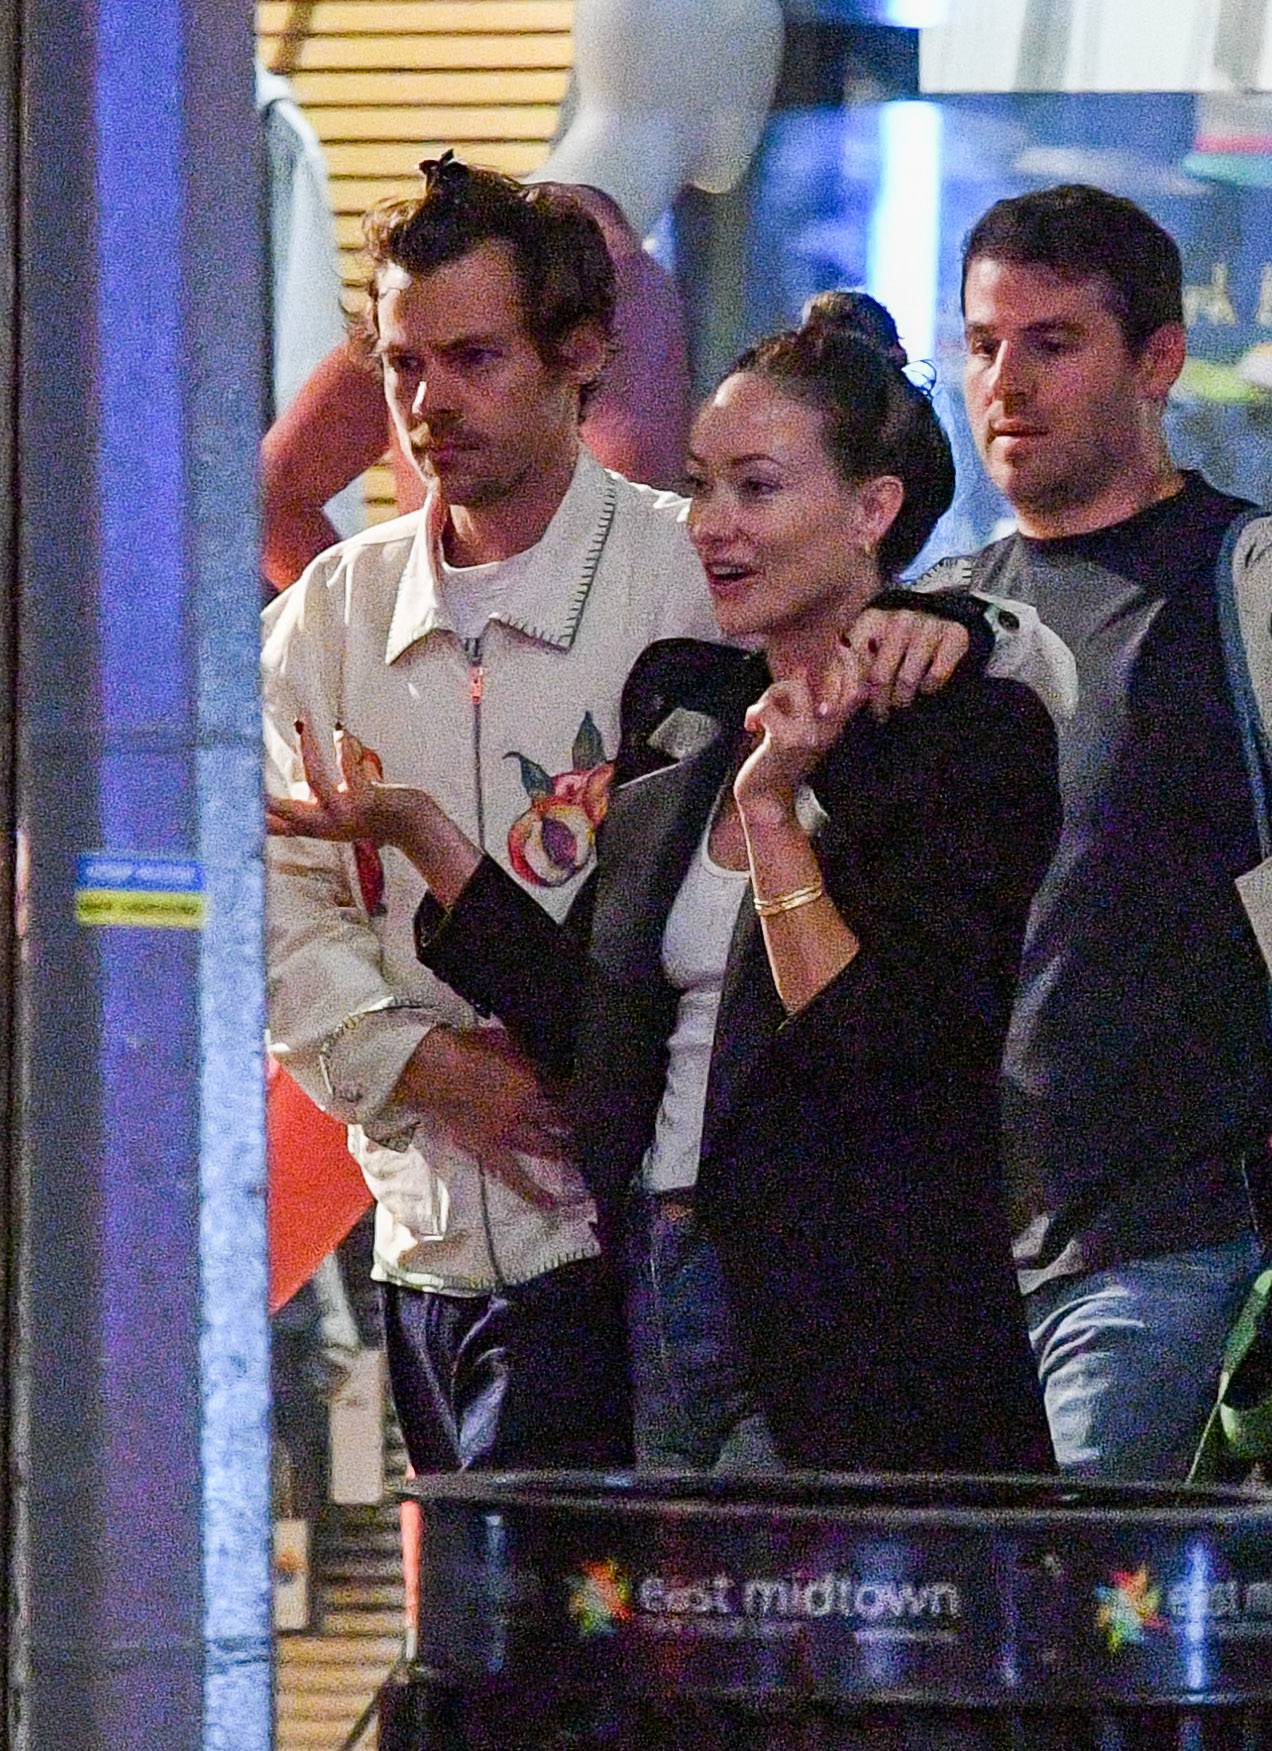 PREMIUM EXCLUSIVE: Harry Styles and Olivia Wilde Pack on The PDA After a Date Night in New York City